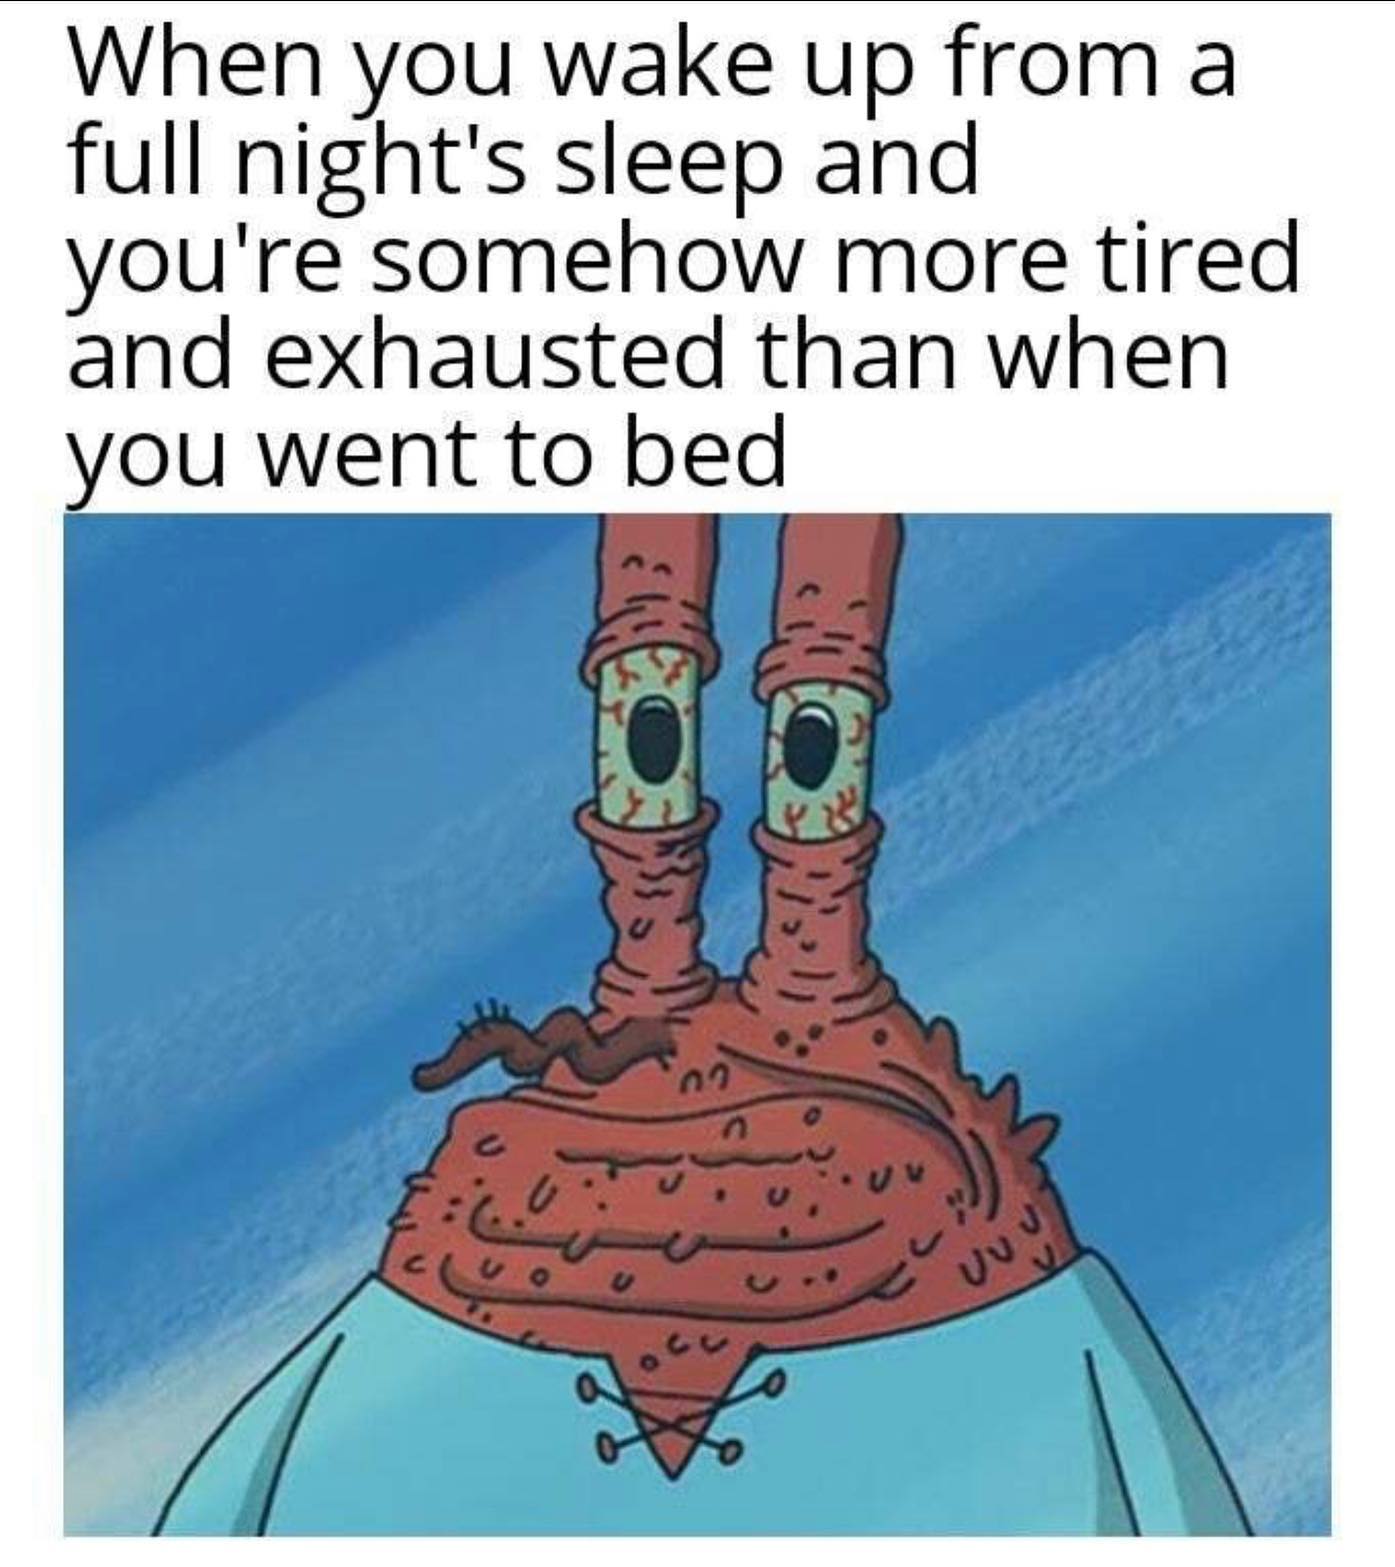 dank memes - spongebob work meme - When you wake up from a full night's sleep and you're somehow more tired and exhausted than when you went to bed